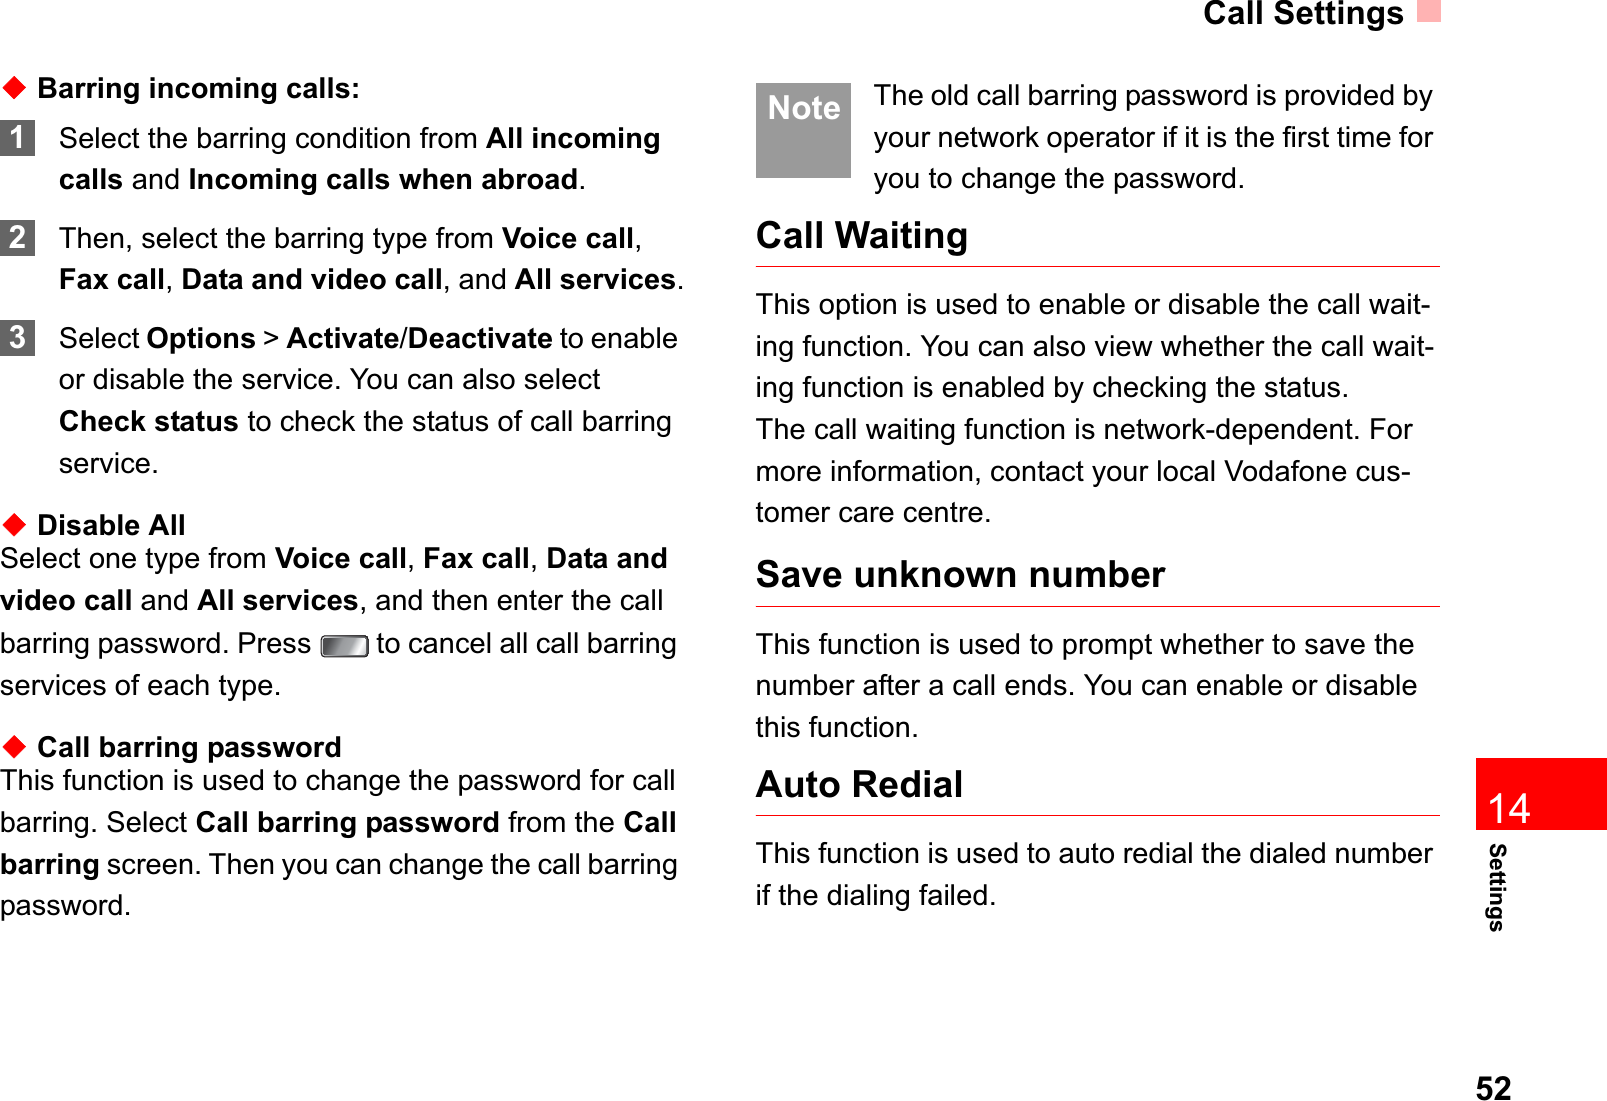 Call Settings52Settings14ƹBarring incoming calls:1Select the barring condition from All incomingcalls and Incoming calls when abroad.2Then, select the barring type from Voice call,Fax call,Data and video call, and All services.3Select Options &gt; Activate/Deactivate to enable or disable the service. You can also select Check status to check the status of call barring service.ƹDisable AllSelect one type from Voice call,Fax call,Data and video call and All services, and then enter the call barring password. Press   to cancel all call barring services of each type.ƹCall barring passwordThis function is used to change the password for call barring. Select Call barring password from the Callbarring screen. Then you can change the call barring password. Note The old call barring password is provided by your network operator if it is the first time for you to change the password.Call WaitingThis option is used to enable or disable the call wait-ing function. You can also view whether the call wait-ing function is enabled by checking the status.The call waiting function is network-dependent. For more information, contact your local Vodafone cus-tomer care centre.Save unknown numberThis function is used to prompt whether to save the number after a call ends. You can enable or disable this function.Auto RedialThis function is used to auto redial the dialed number if the dialing failed.